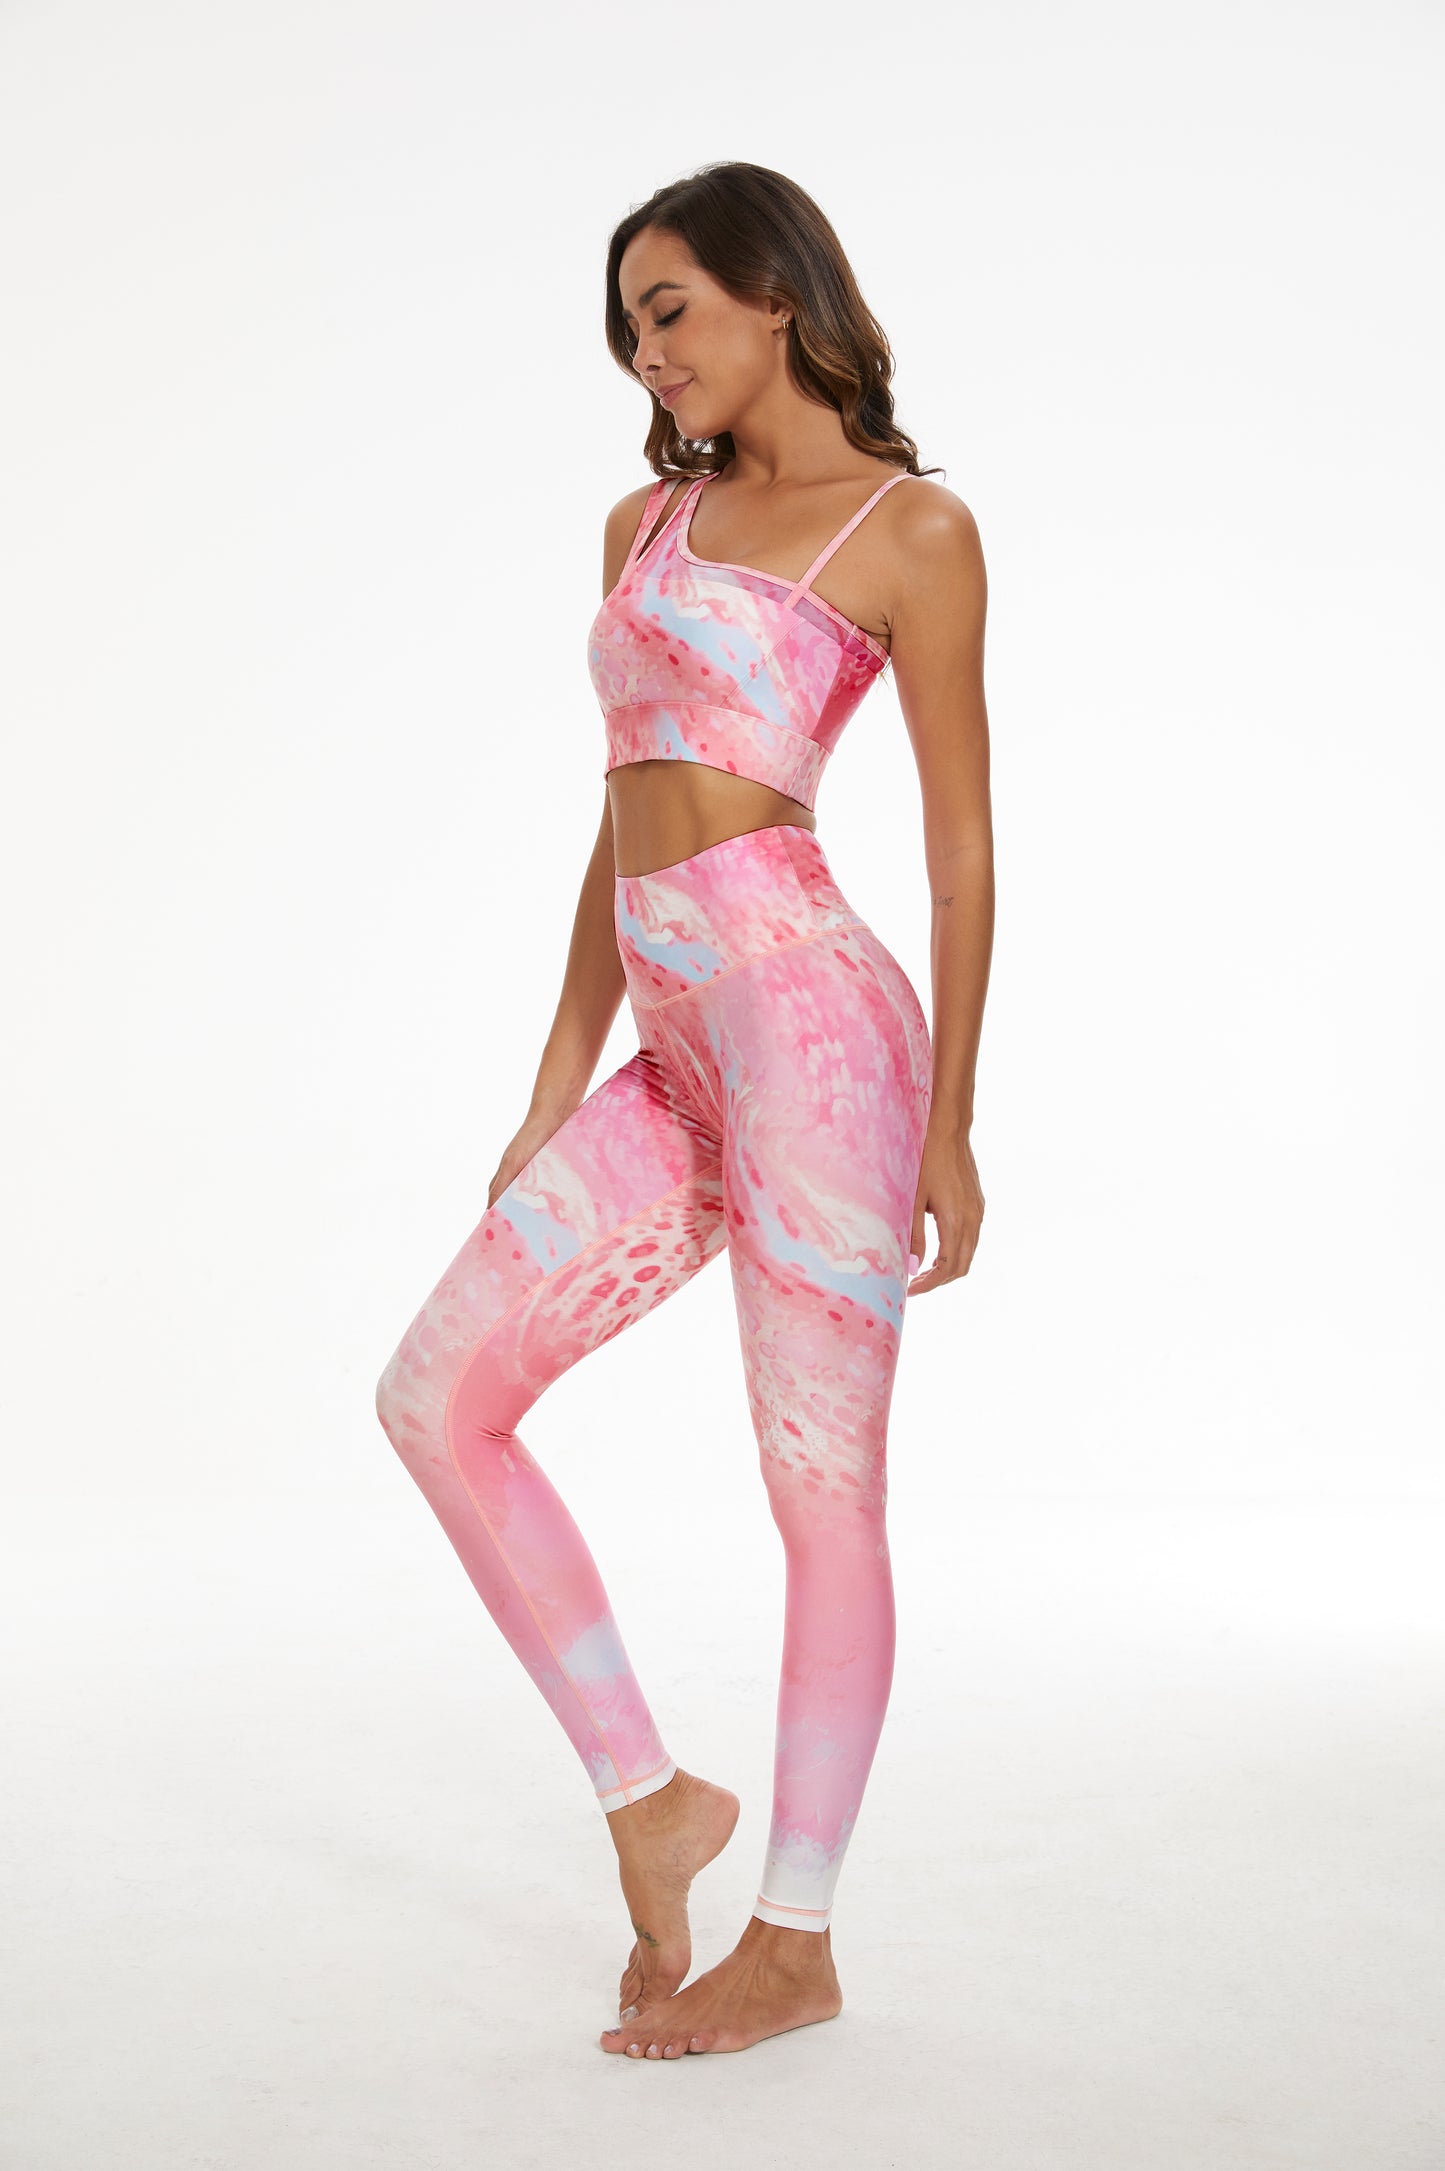 Illusion High-waisted Leggings - Pink